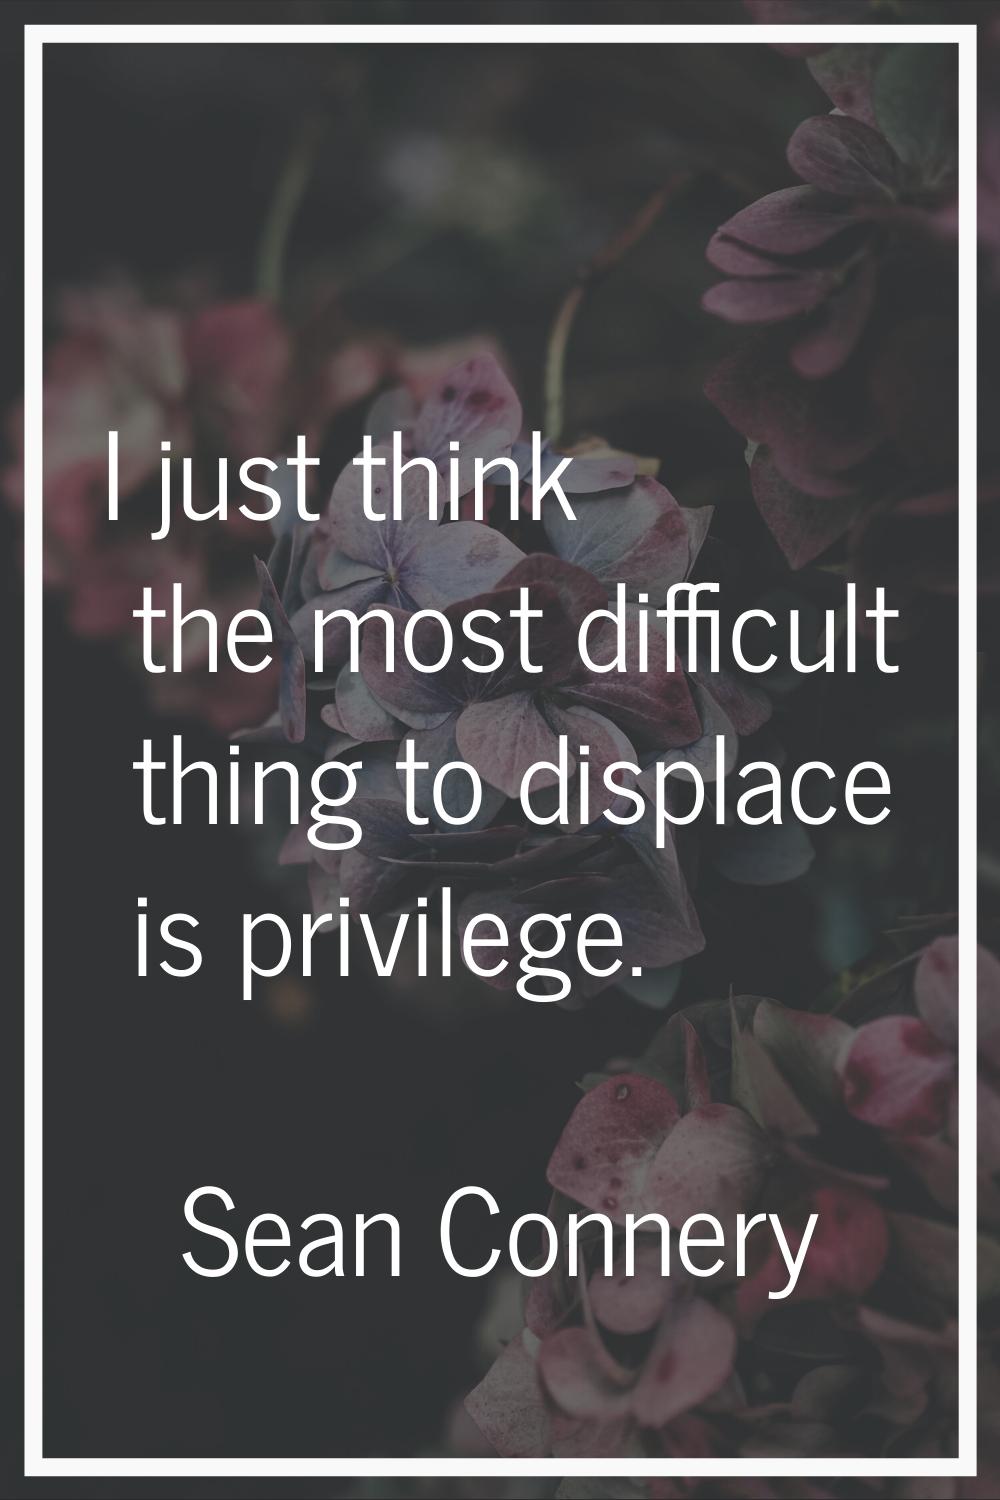 I just think the most difficult thing to displace is privilege.